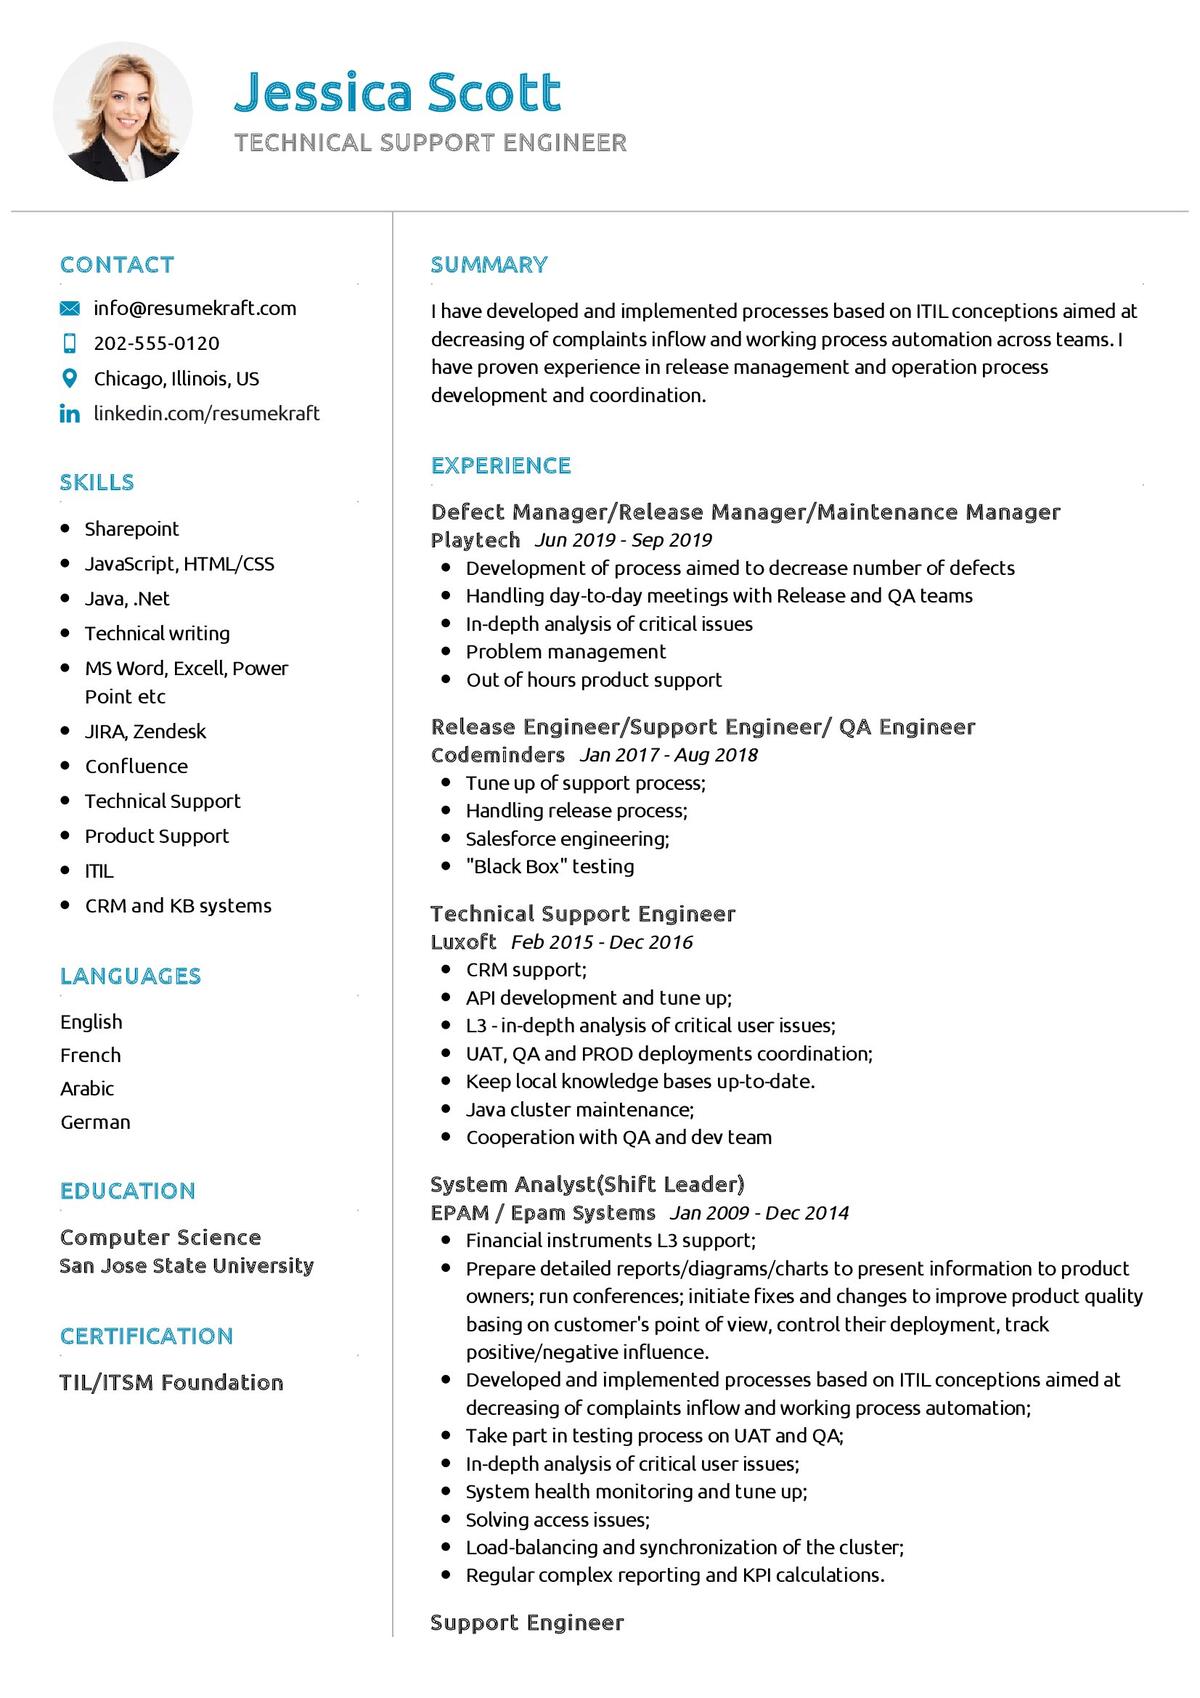 resume for technical support engineer fresher